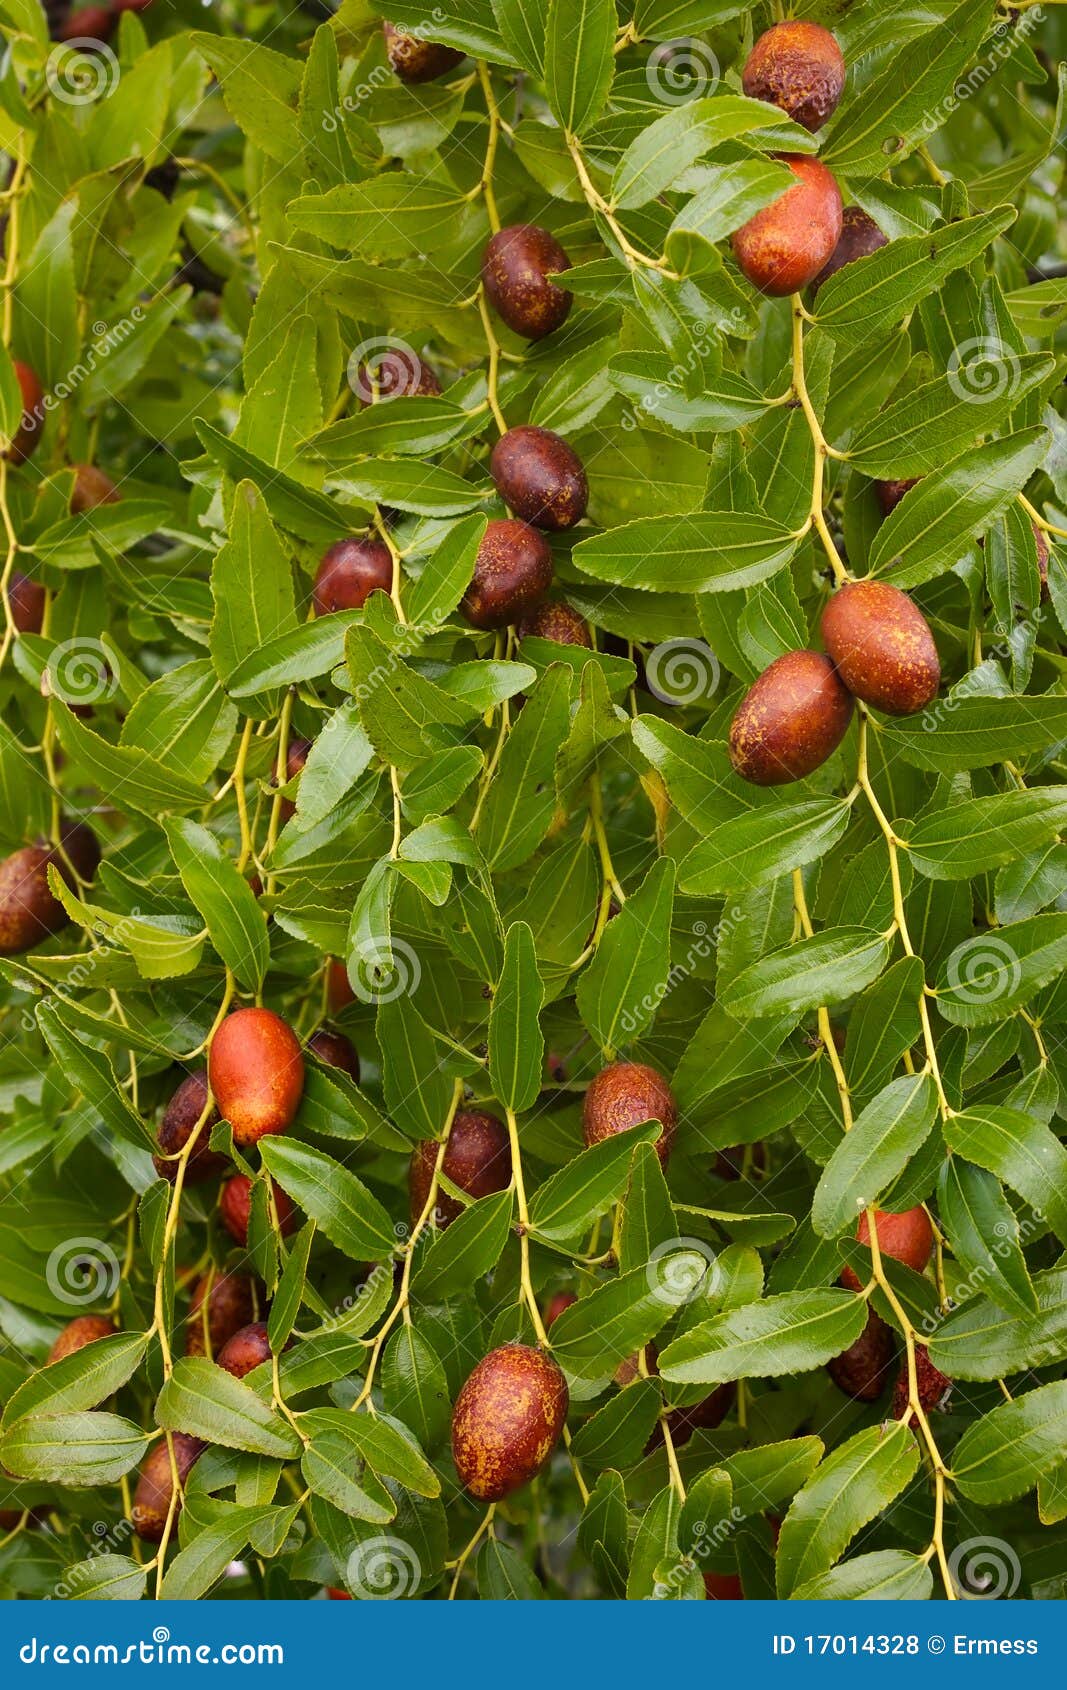 11 750 Jujube Photos Free Royalty Free Stock Photos From Dreamstime